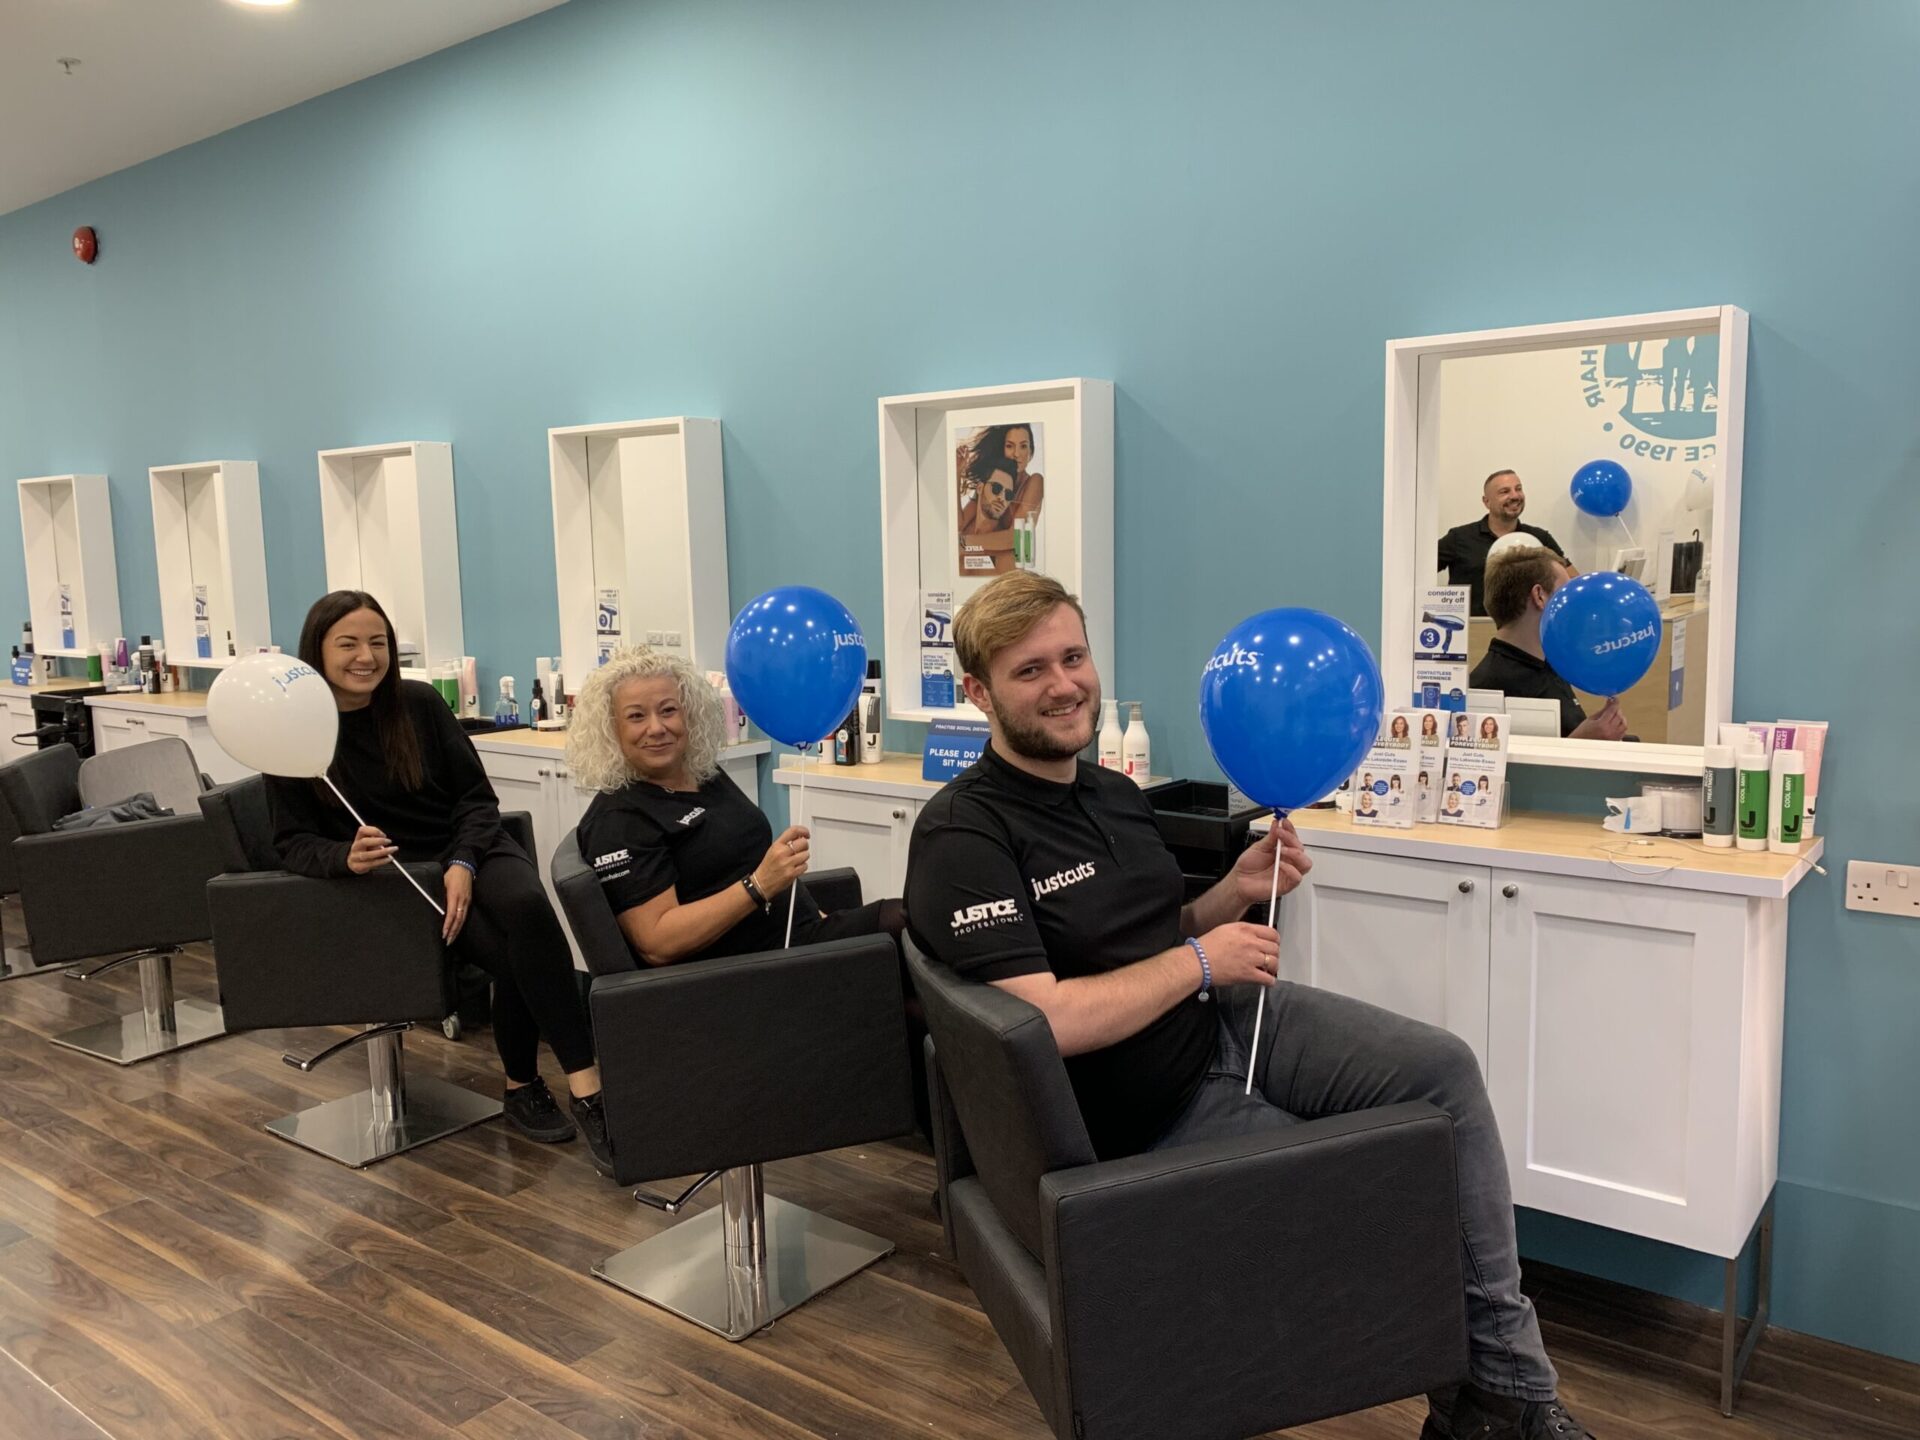 Just Cuts award their salon owners for commitment to industry